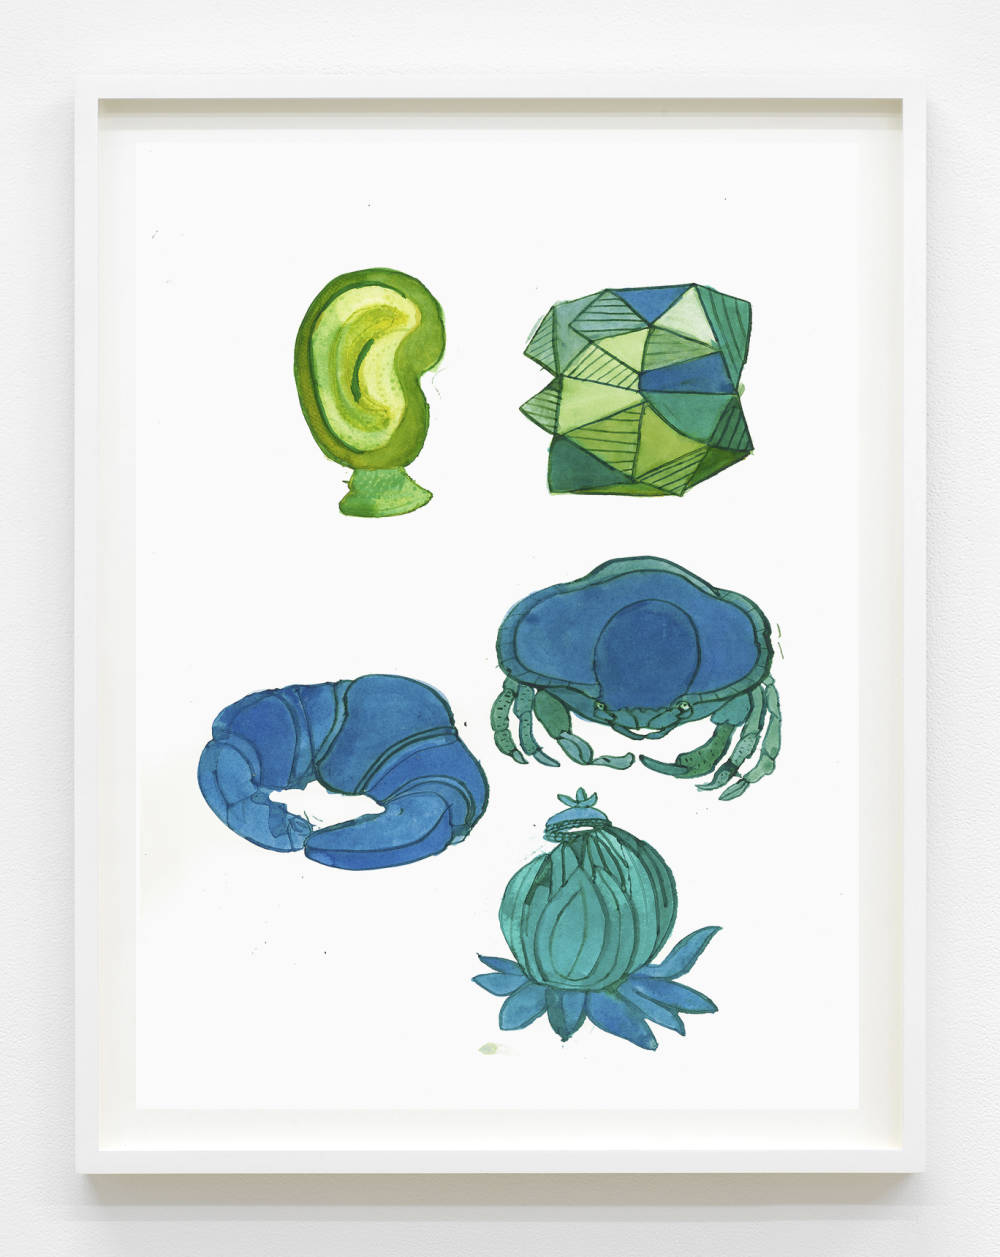 An ink drawing in a white frame displaying a number of objects in green and blue watercolor floating on a white background: an ear, a geode, a croissant, a crab, an artichoke.